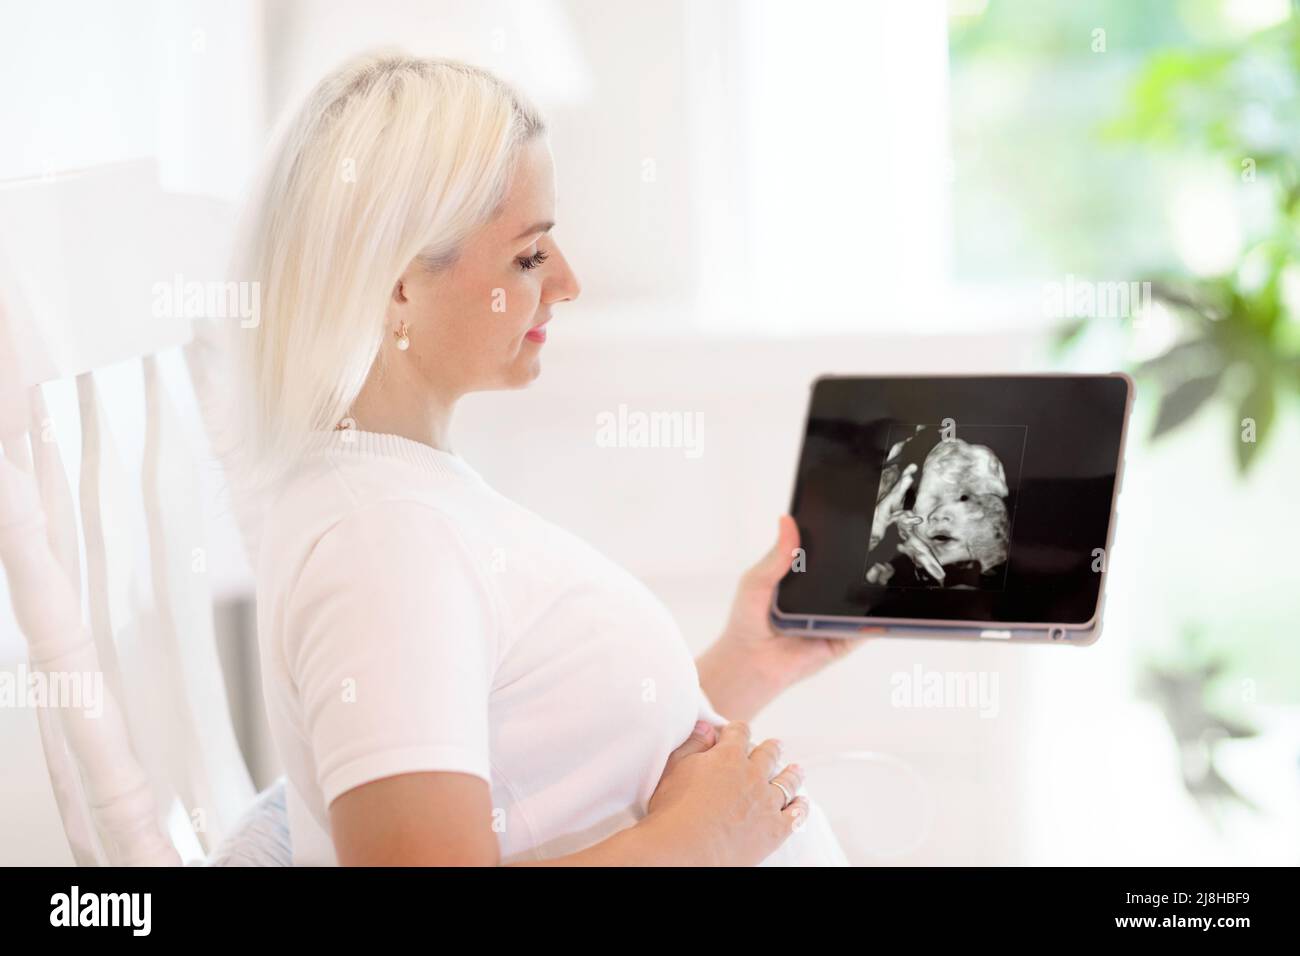 Pregnant woman at home. Young expecting mother looking at ultrasound picture on tablet computer. Healthy pregnancy. Stock Photo